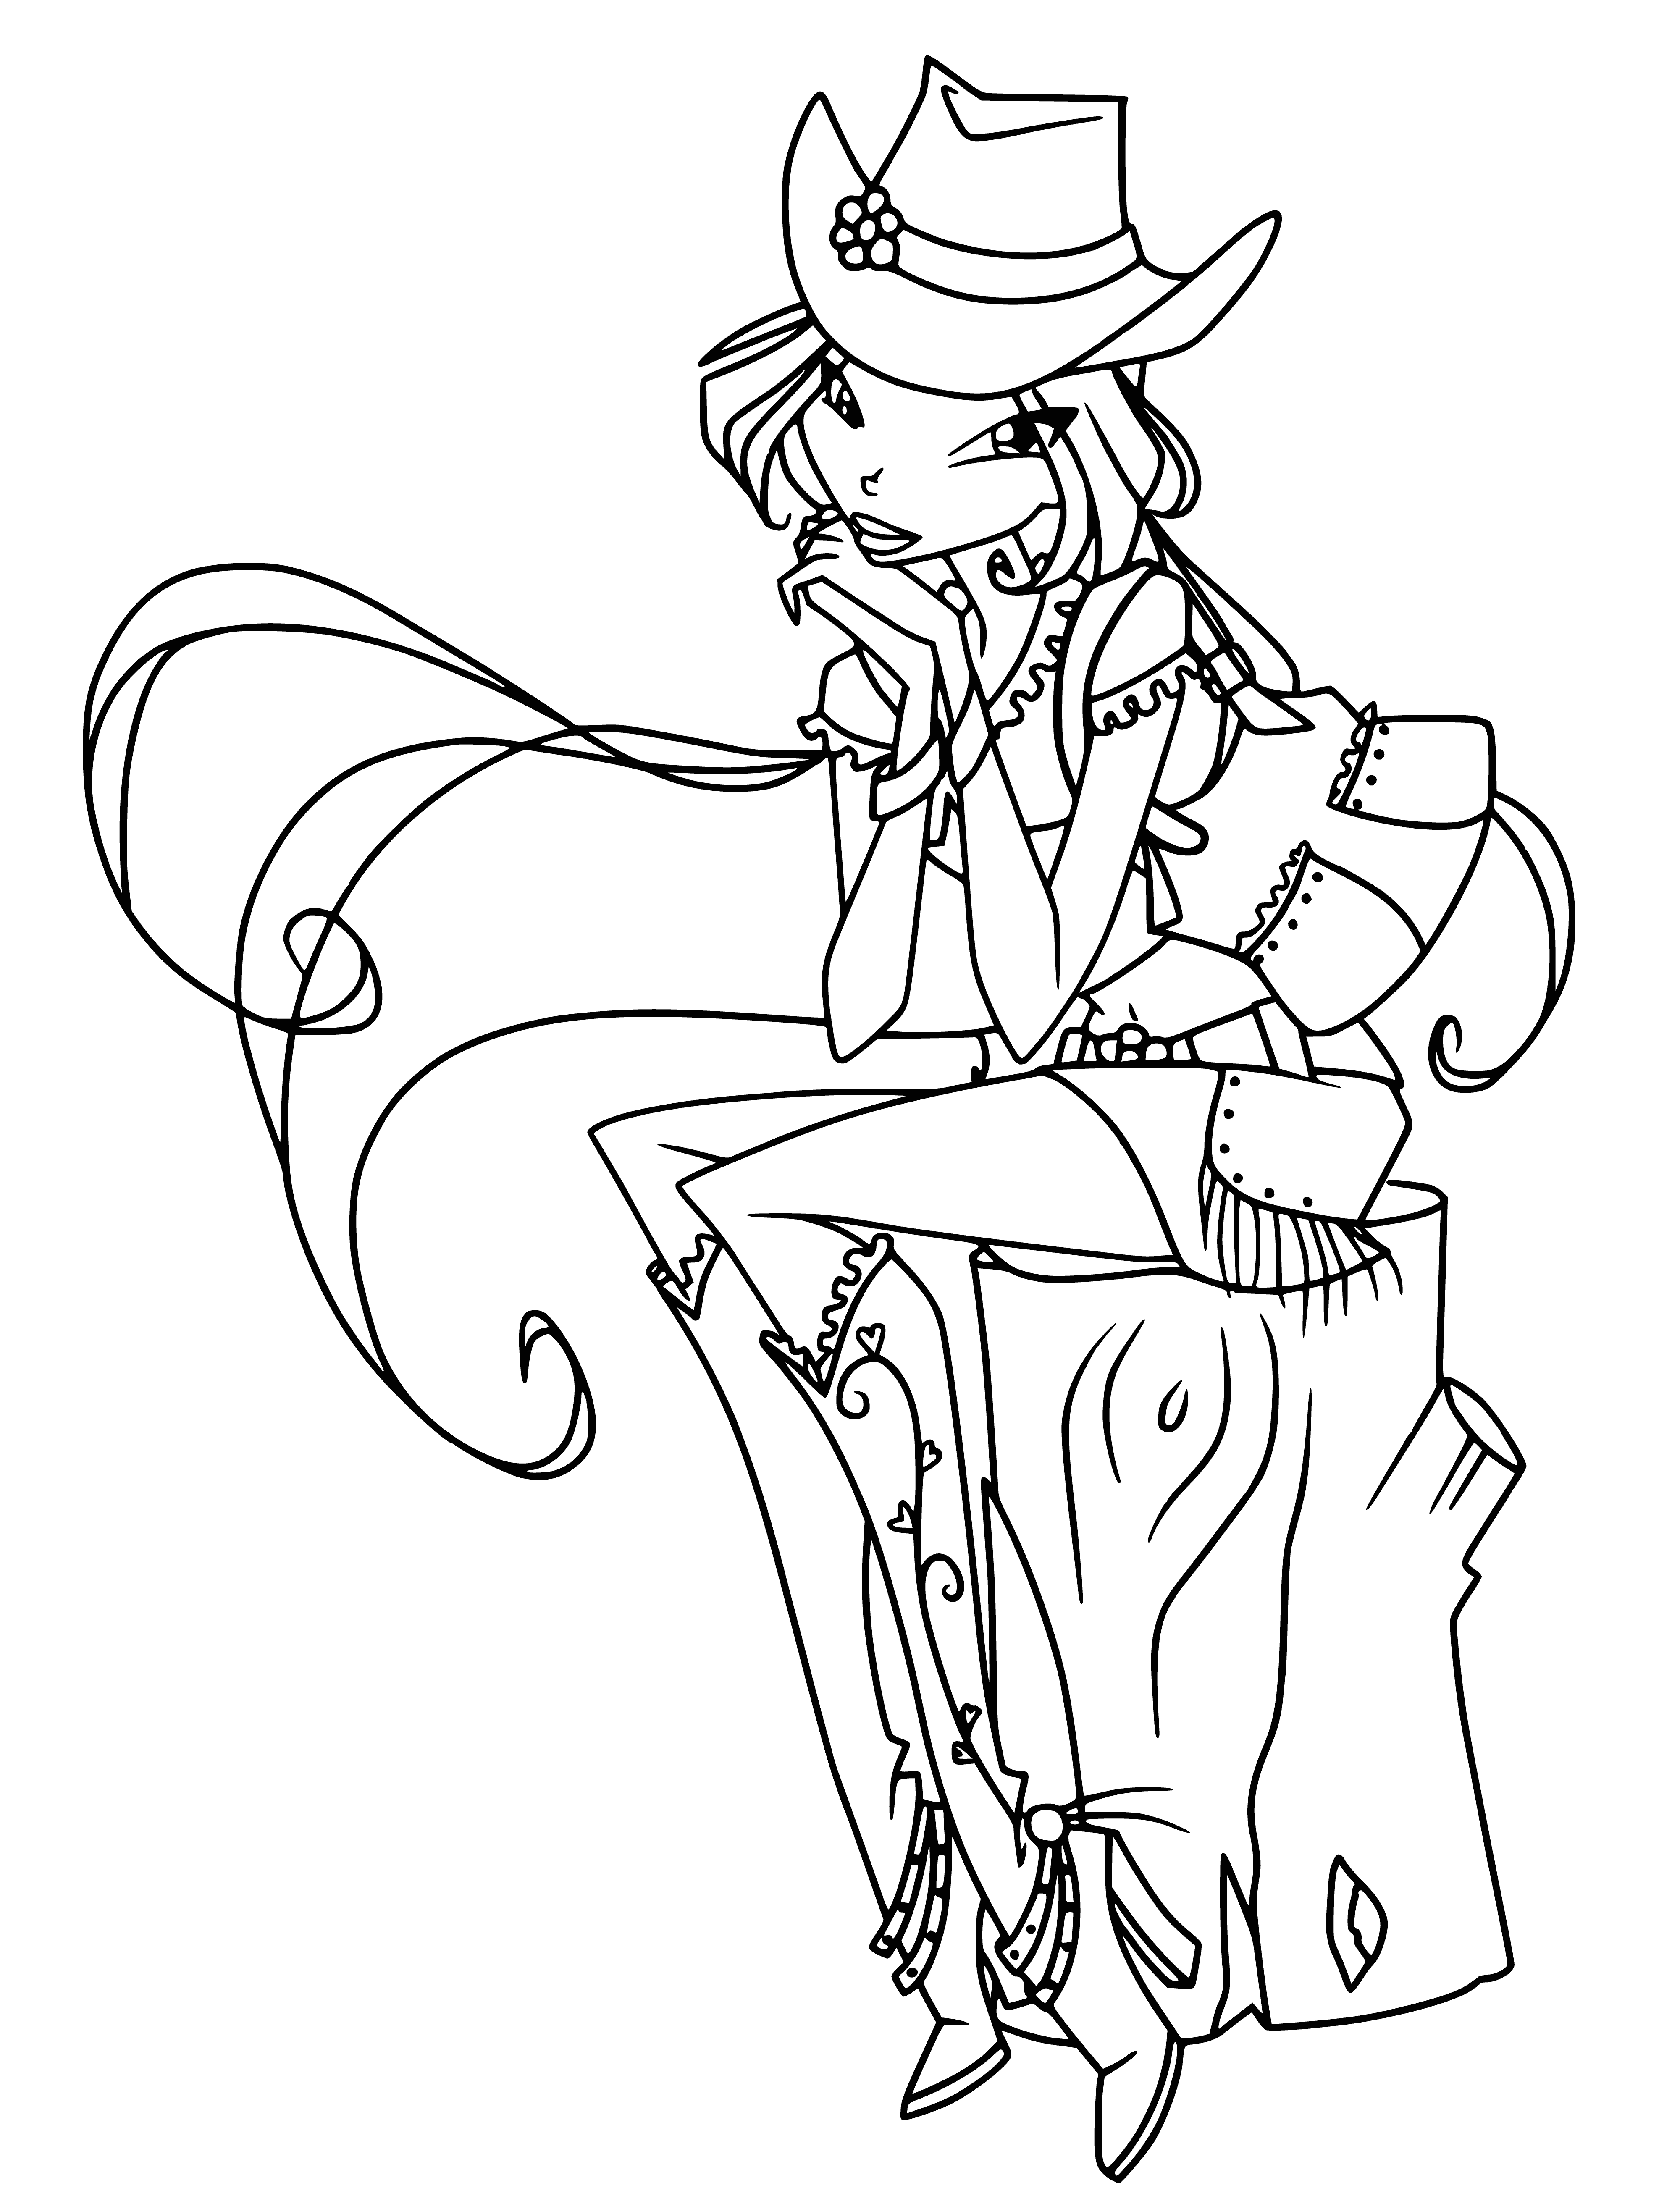 coloring page: Flora is a young woman in a cowboy outfit, wearing a hat, leather jacket, and jeans, strumming a guitar. #westernstyle